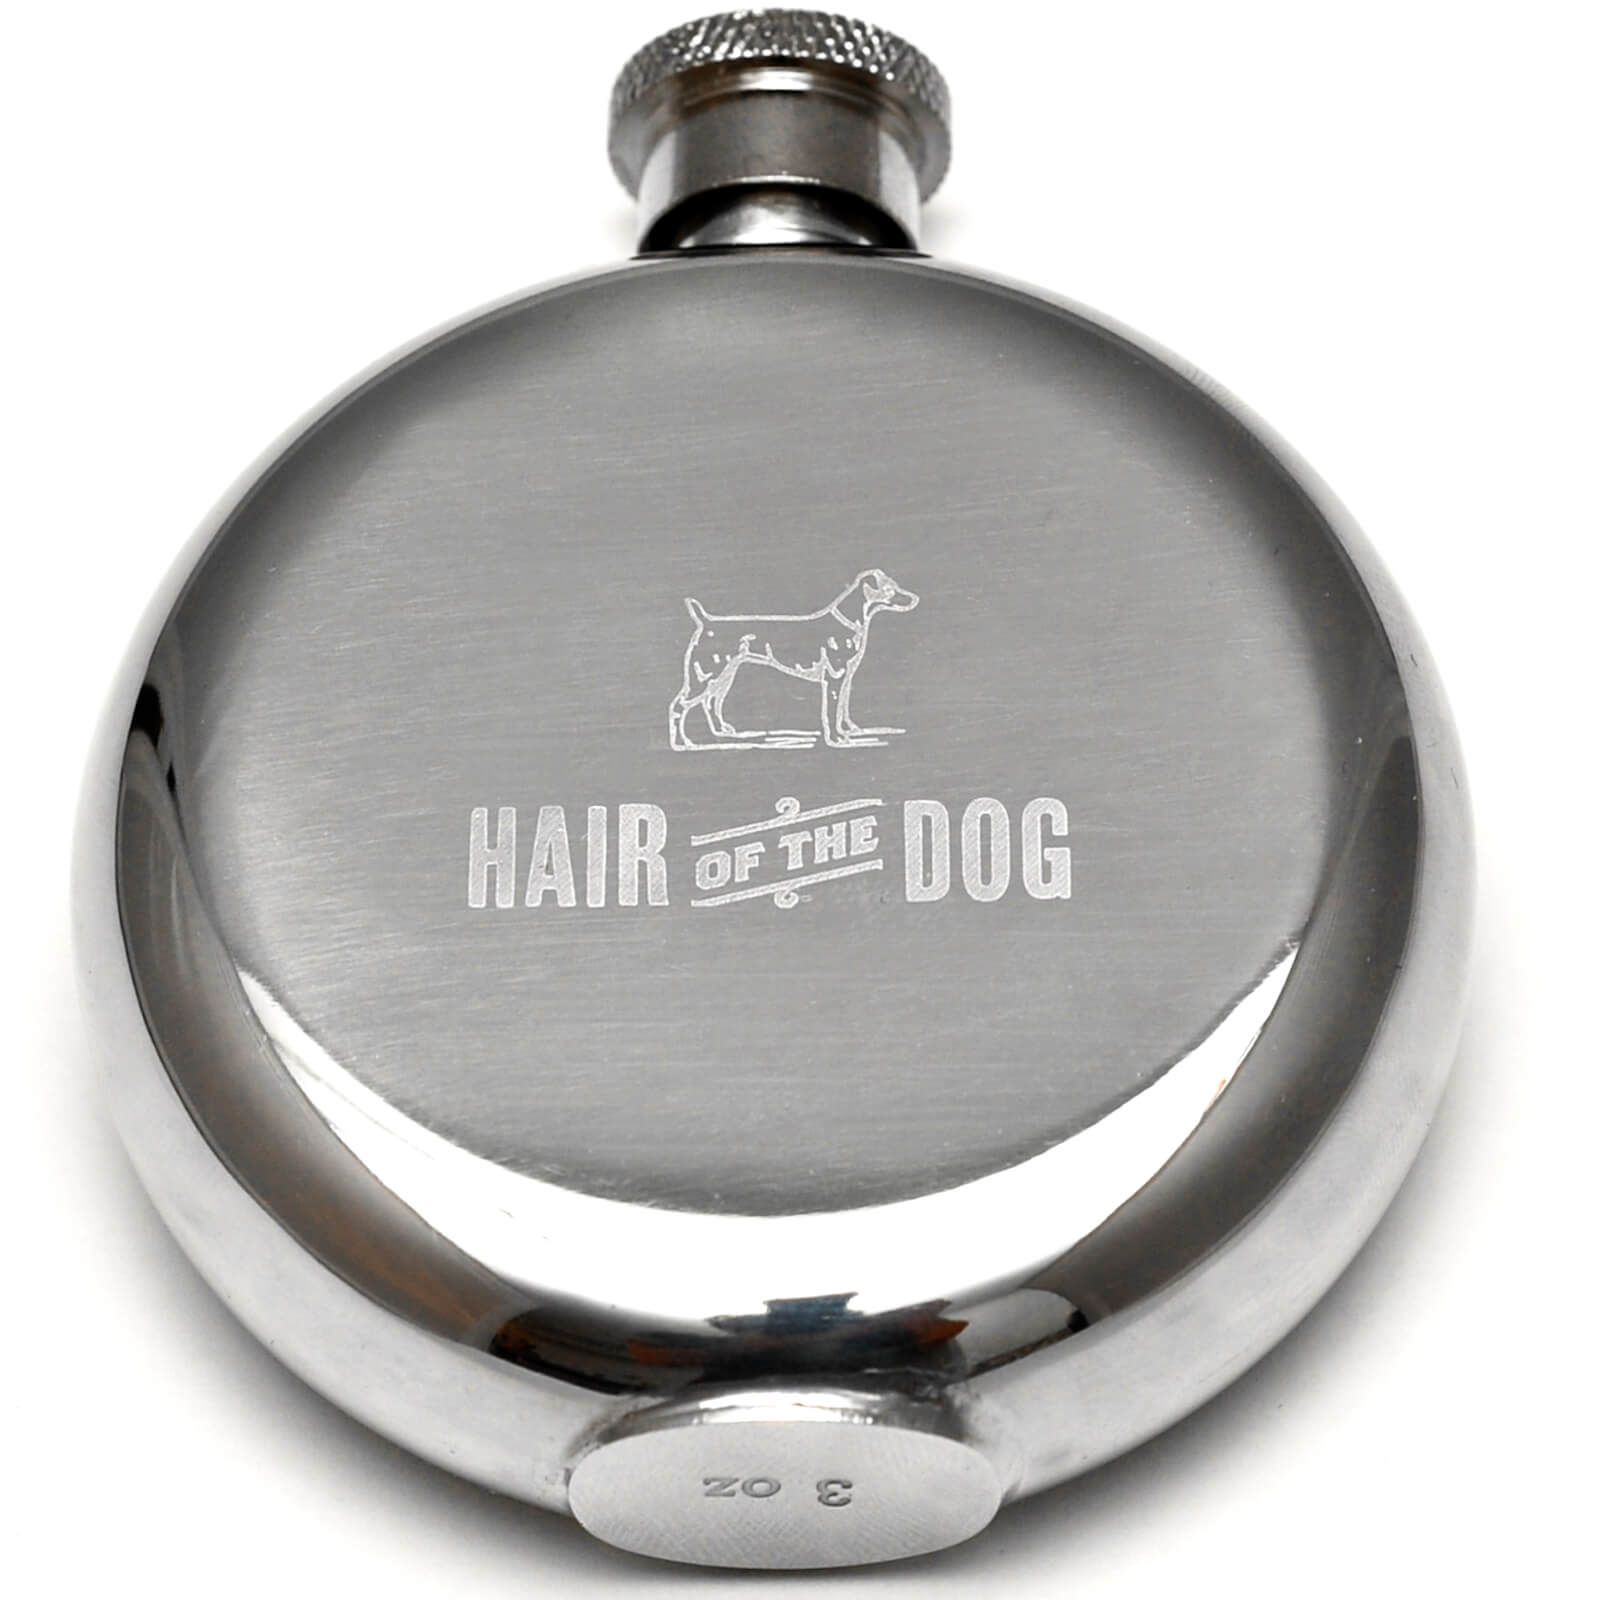 Men's Society 'Hair Of The Dog' Hip Flask